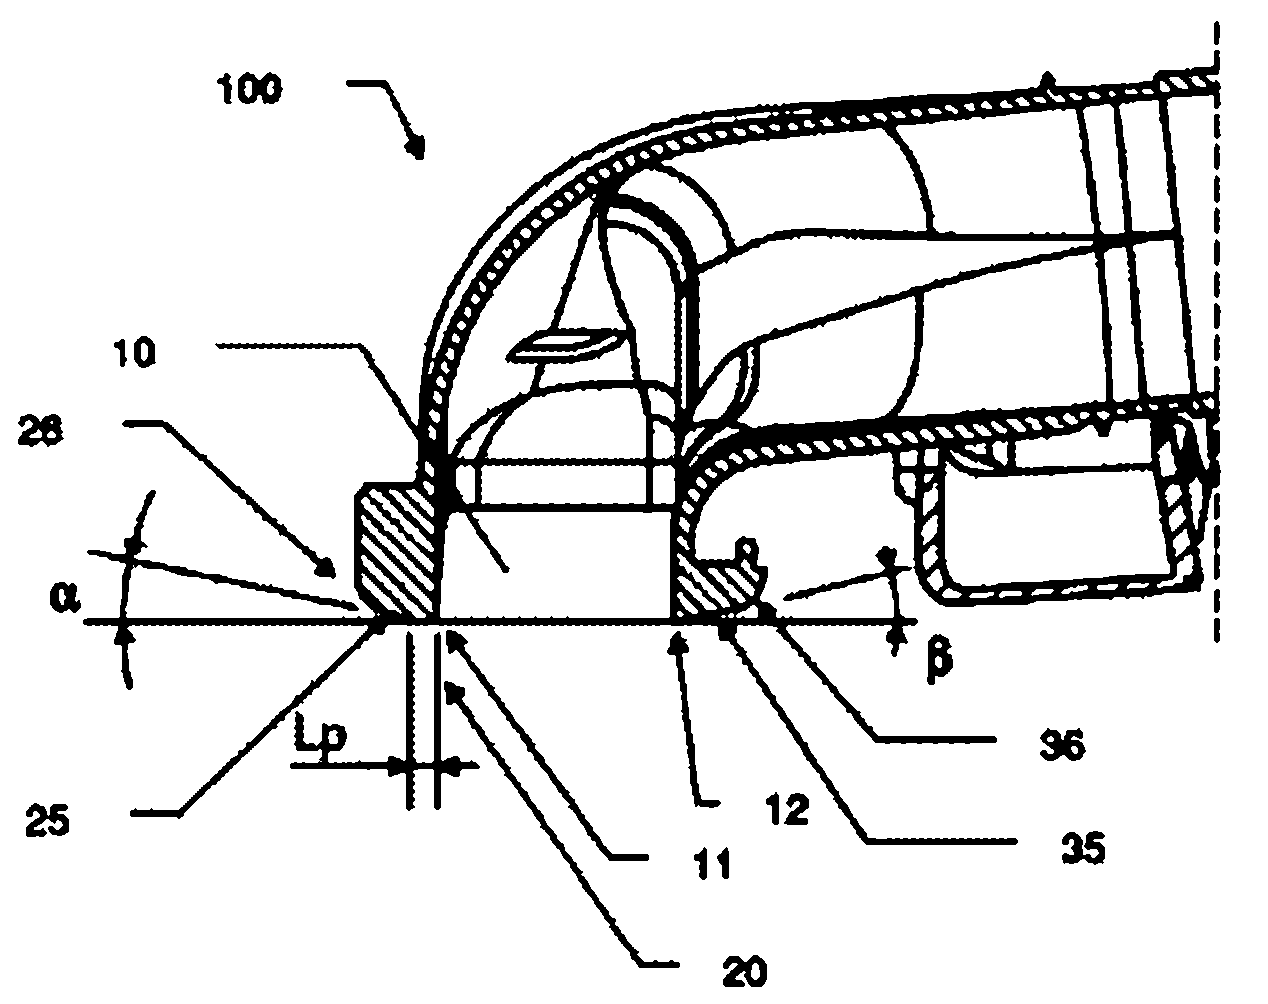 Suction nozzle sliding base plate of a vacuum cleaner